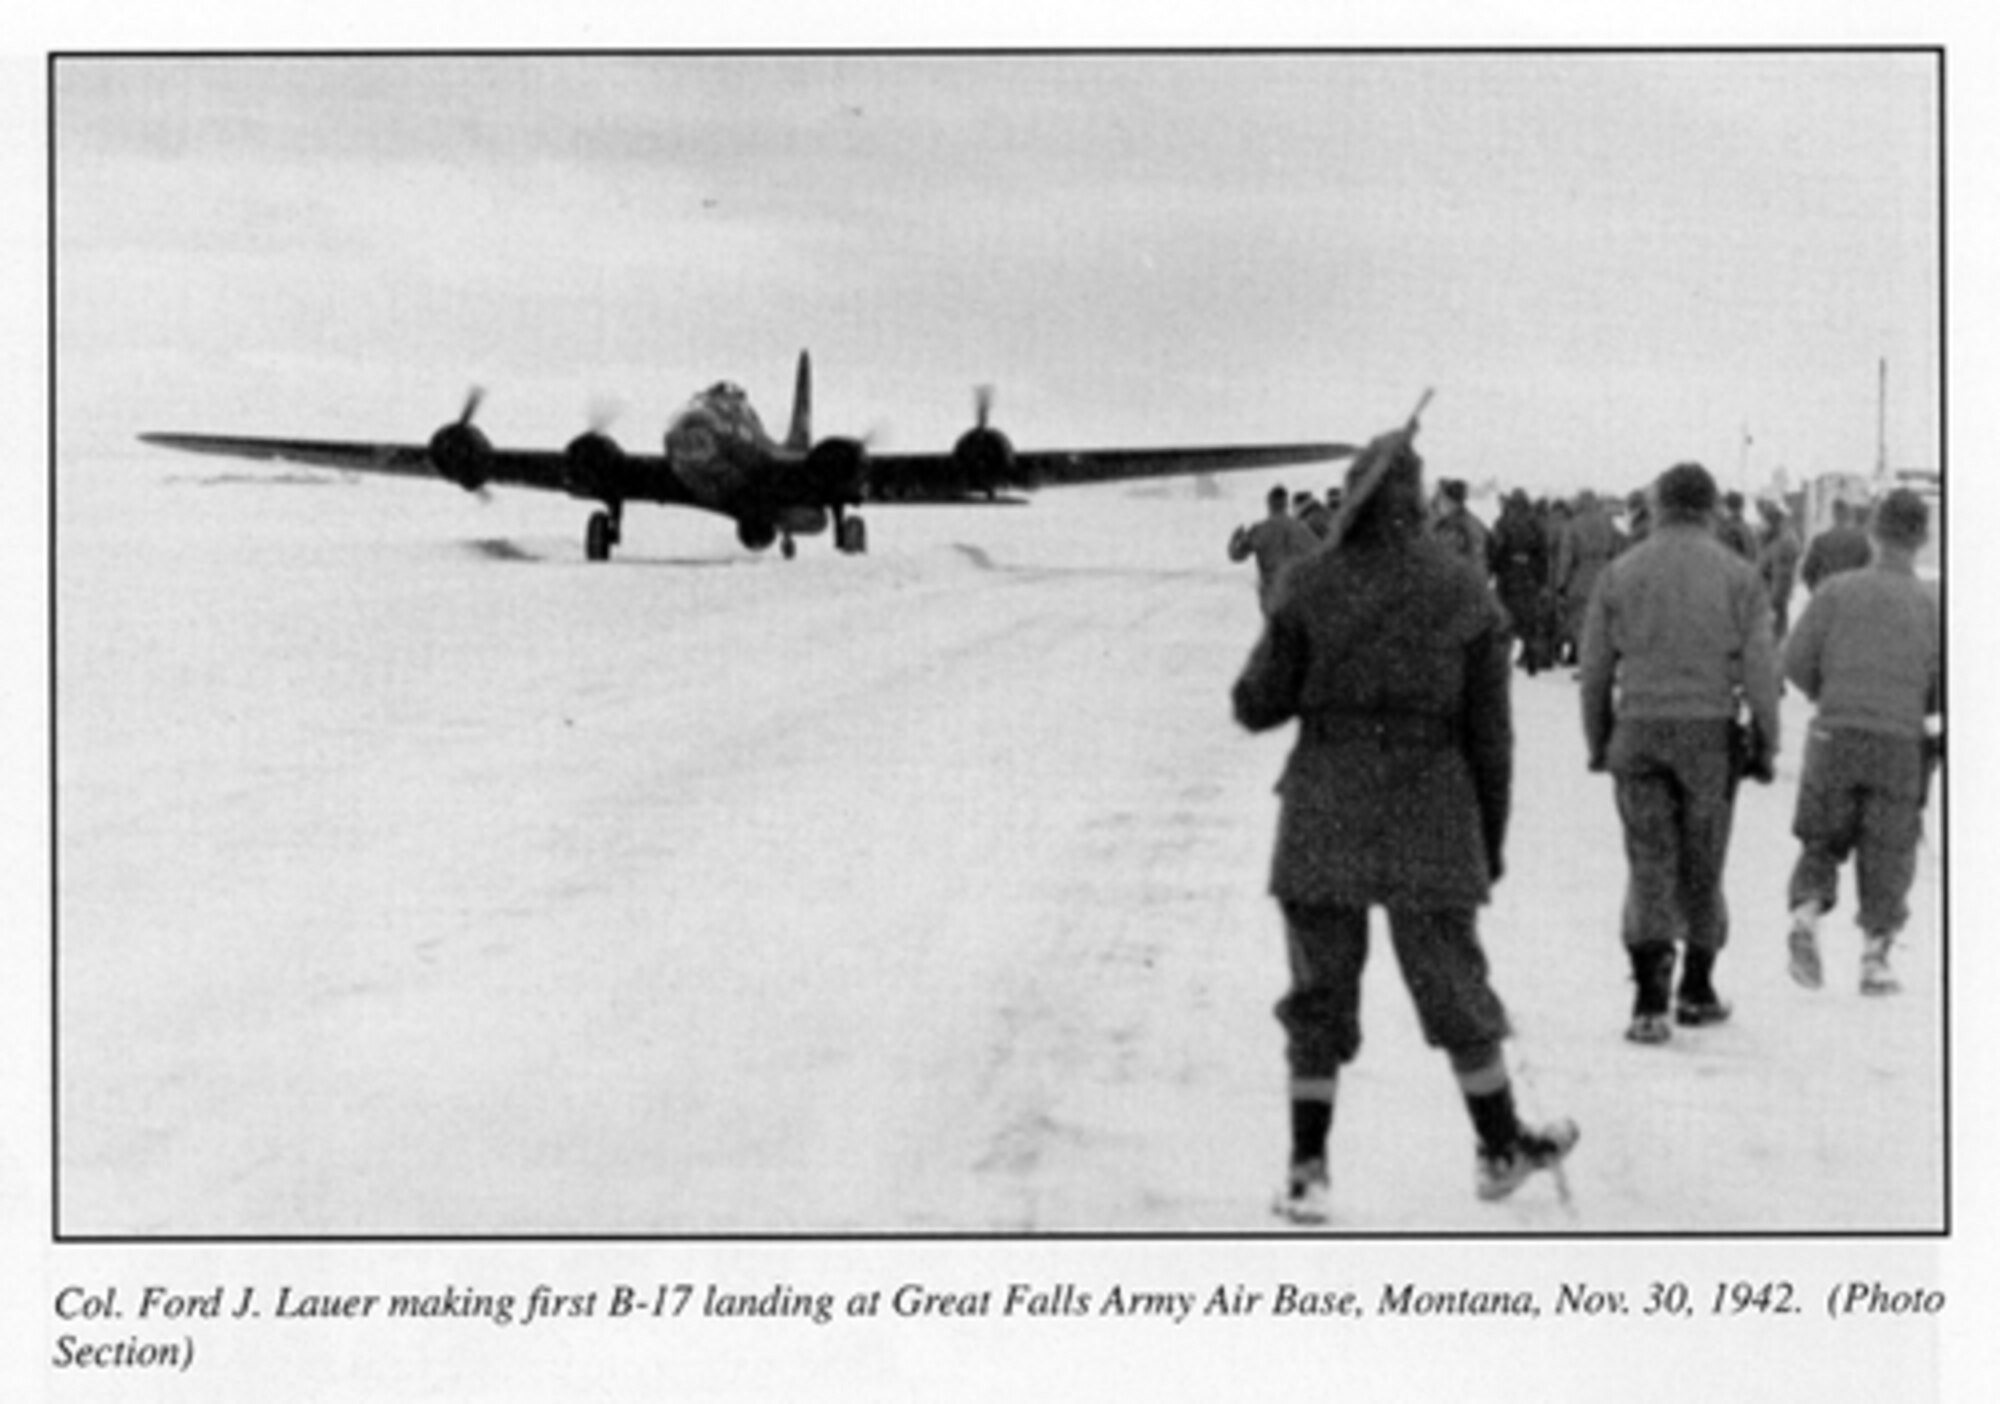 Col. Ford J. Lauer making first B-17 landing at Great Falls Army Air Base, Mont., Nov. 30, 1942.